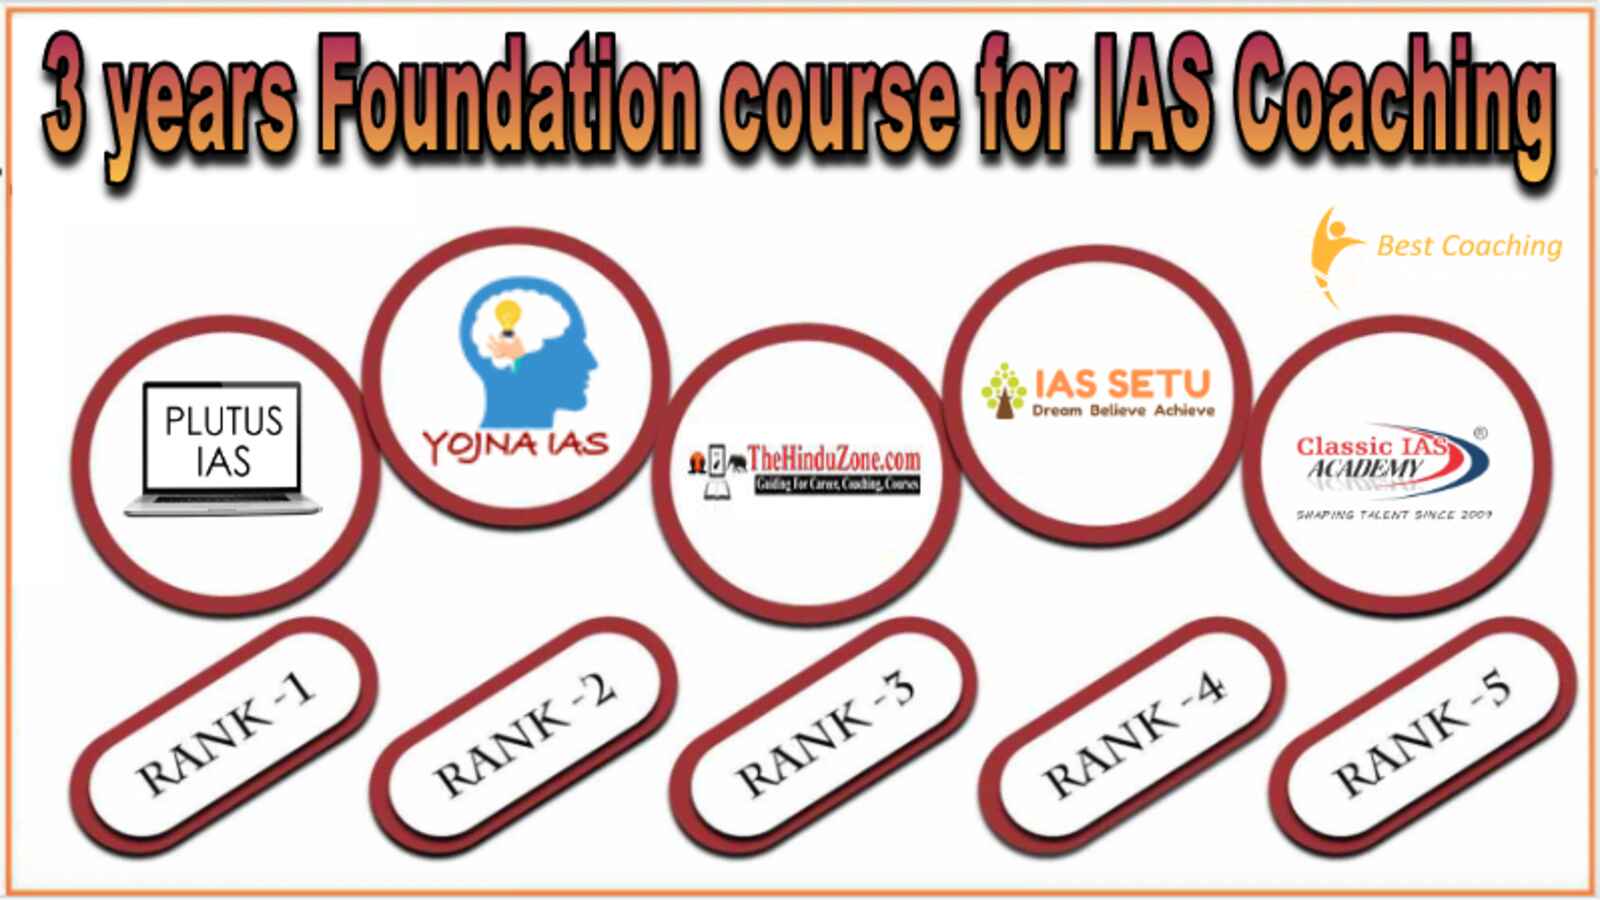 3 years foundation course for IAS Coaching in Delhi